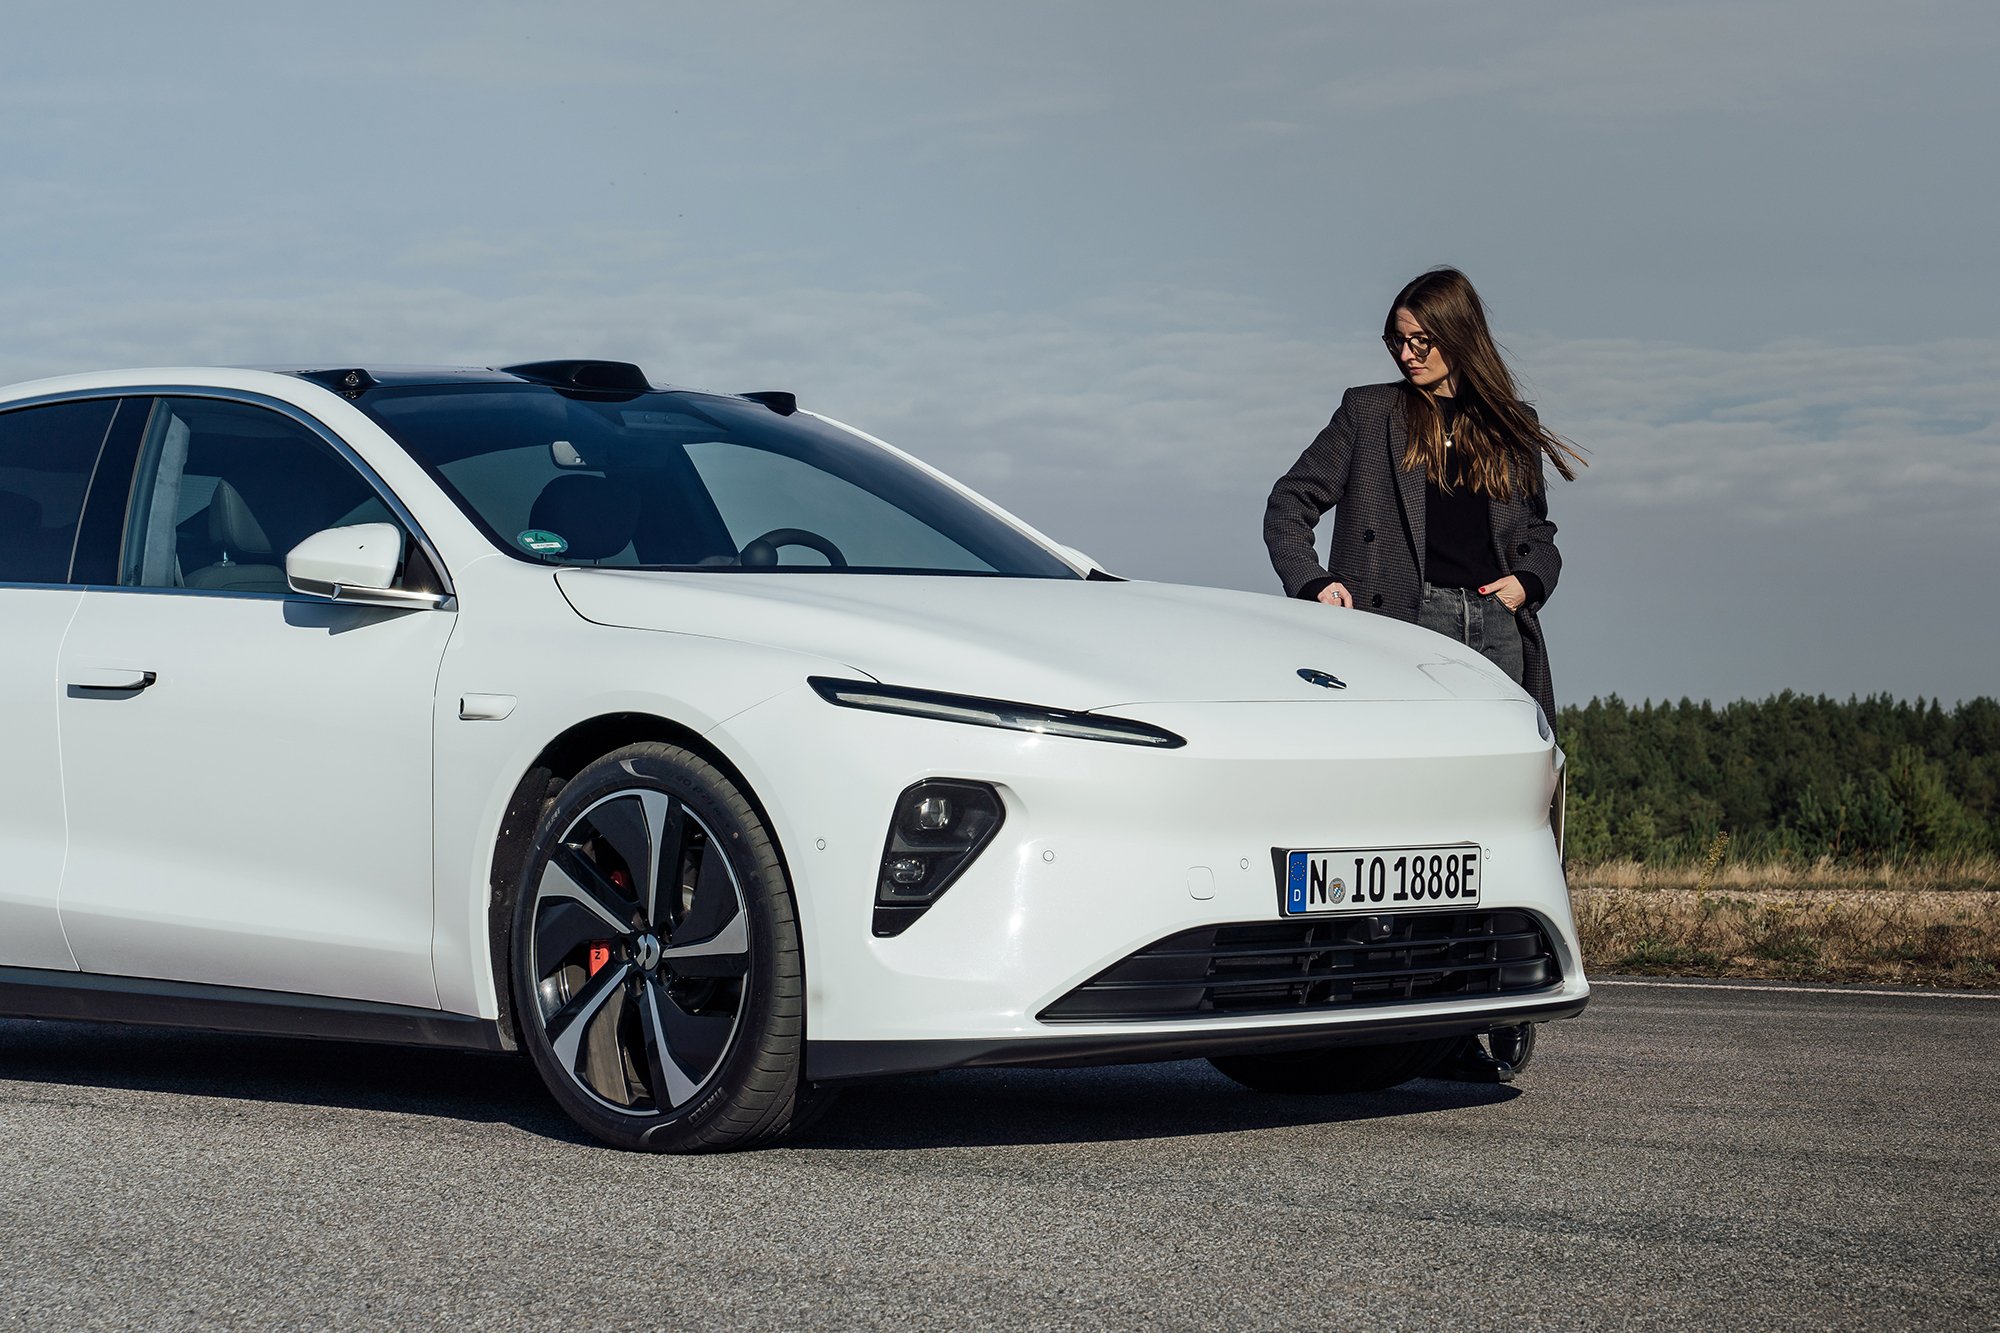 Britta Reineke, founder of ellectric stands next to the front of the all-electric white NIO ET7